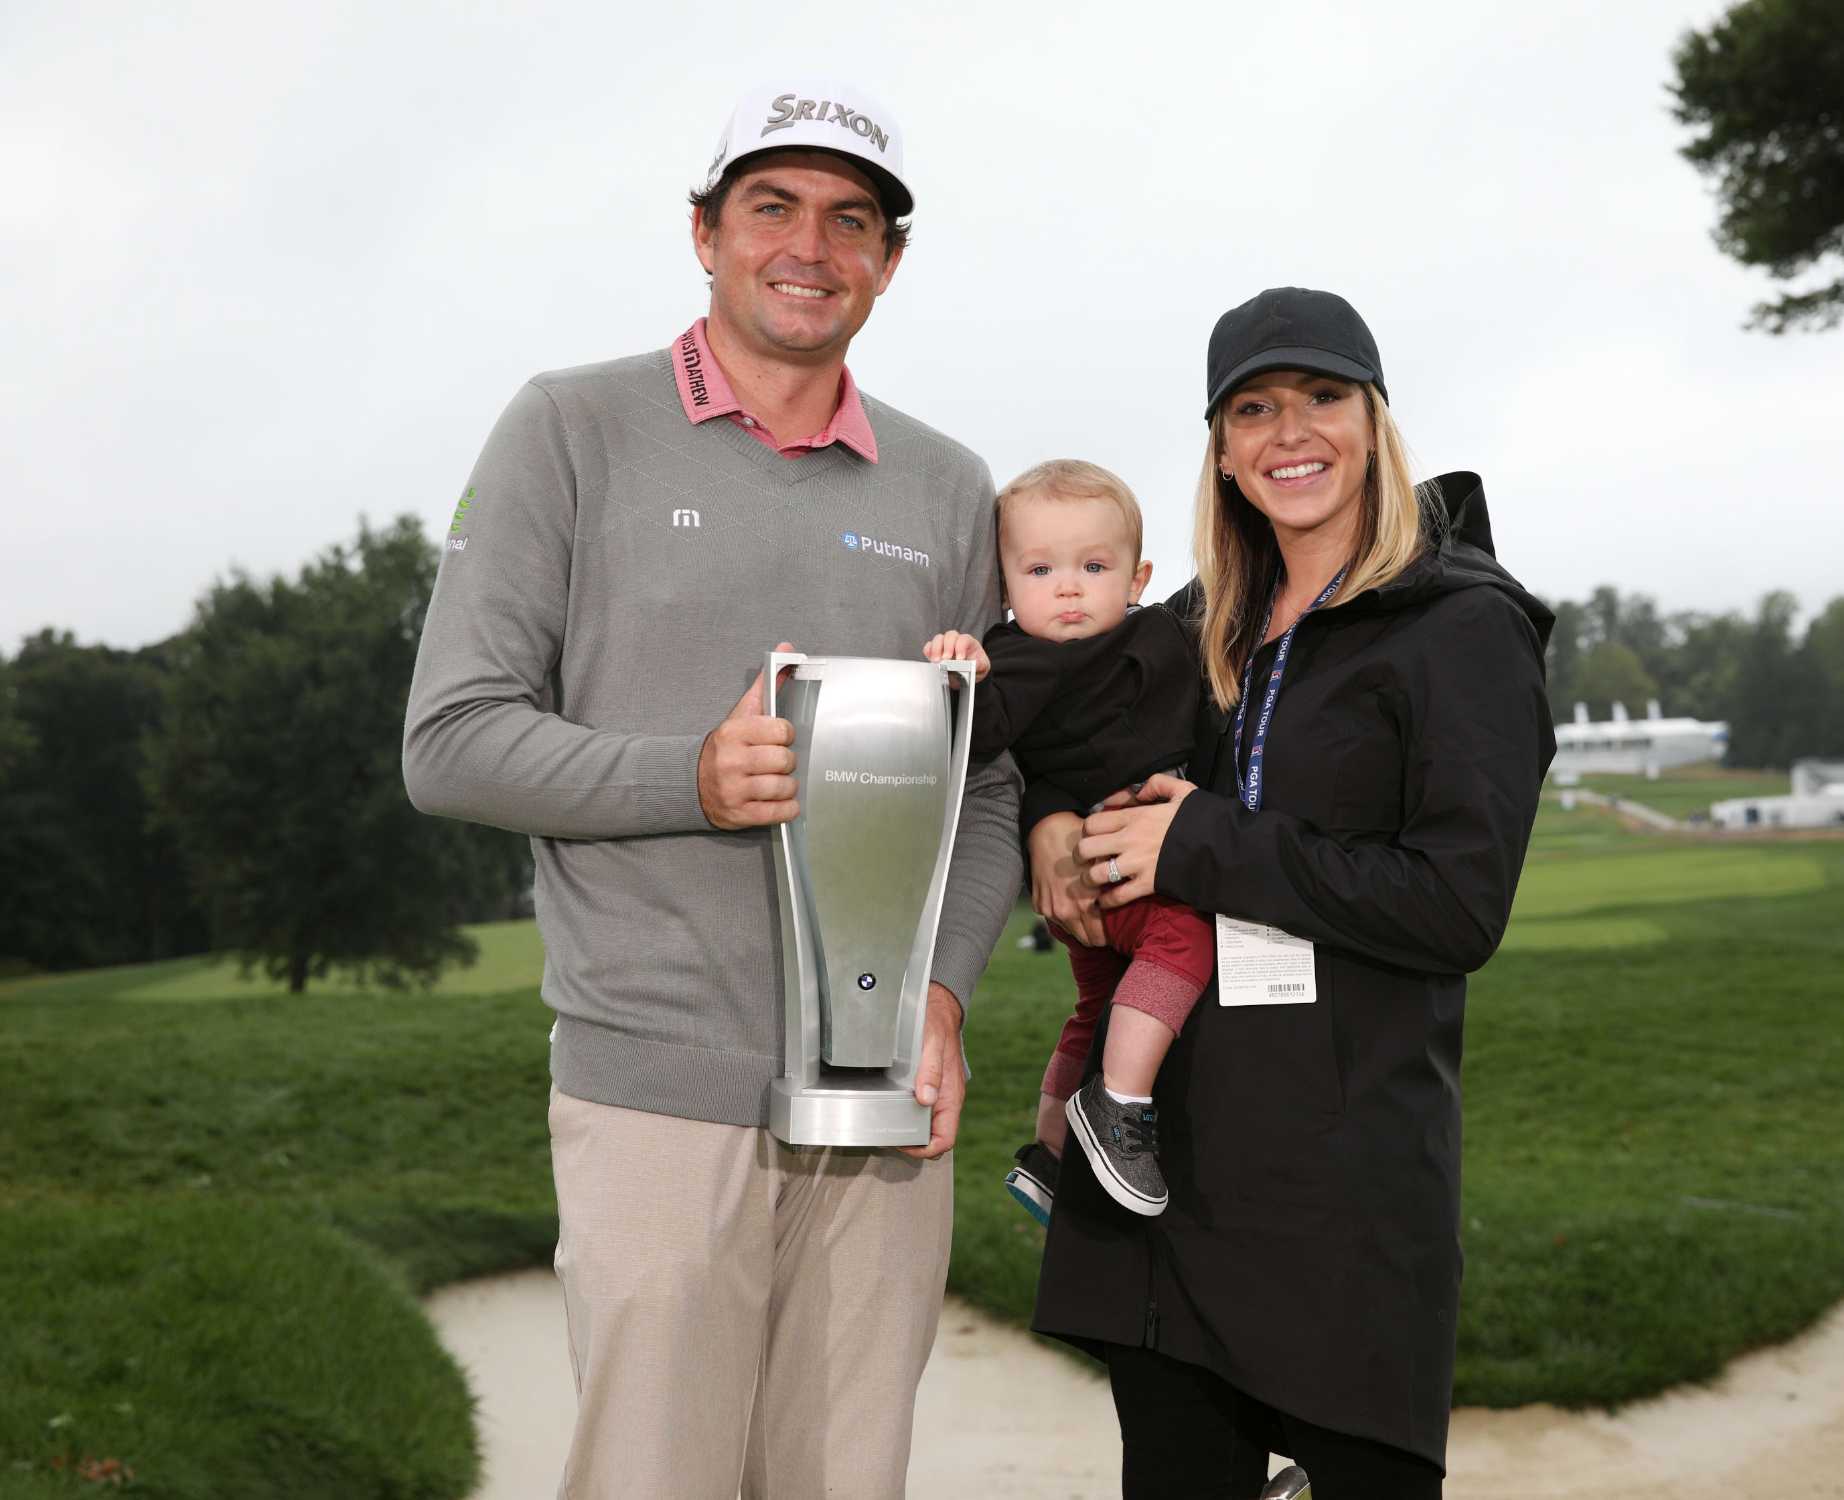 PGA TOUR pro Keegan Bradley holds the BMW Championship trophy alongside his  wife, Jillian, and their son, Logan, following his victory at Aronimink  Golf Club in Newtown Square, PA on Monday, September